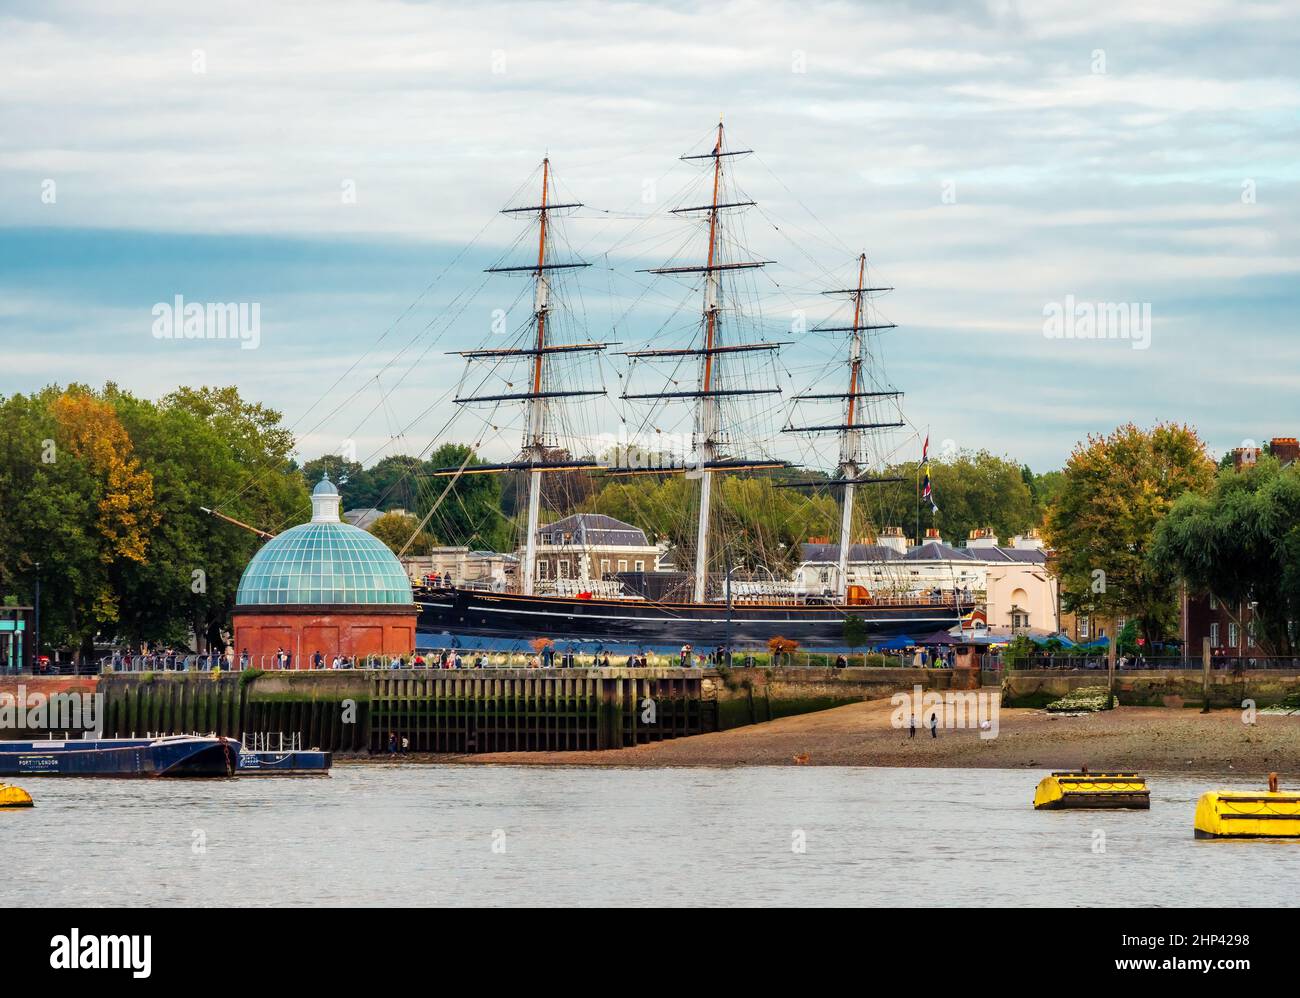 London, England, UK - October 17, 2019: View from the River Thames of the famous Cutty Sark historical ship and Greenwich Pier in fall season Stock Photo